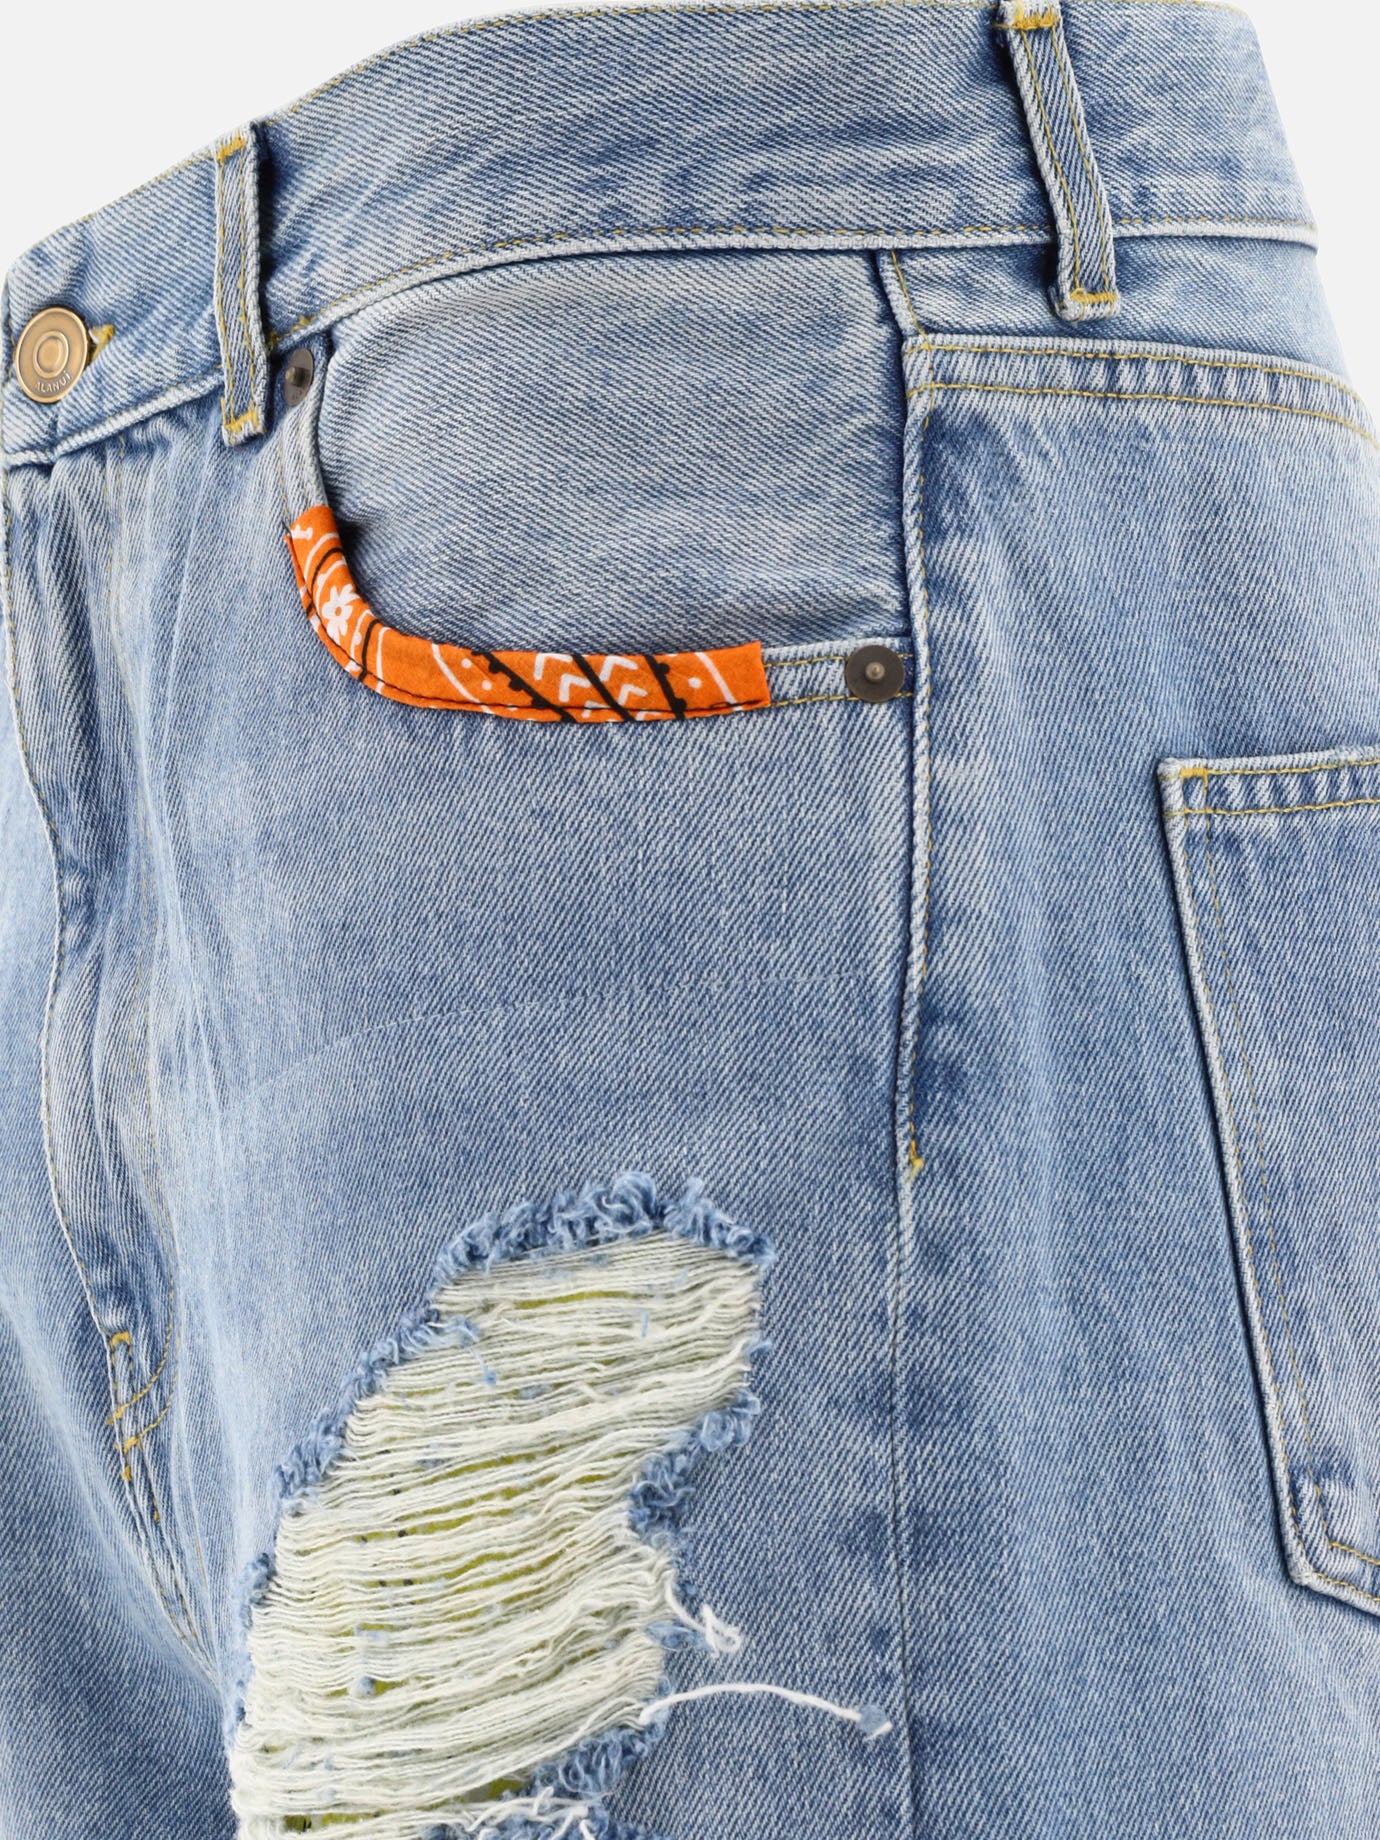 "California Patchwork" jeans